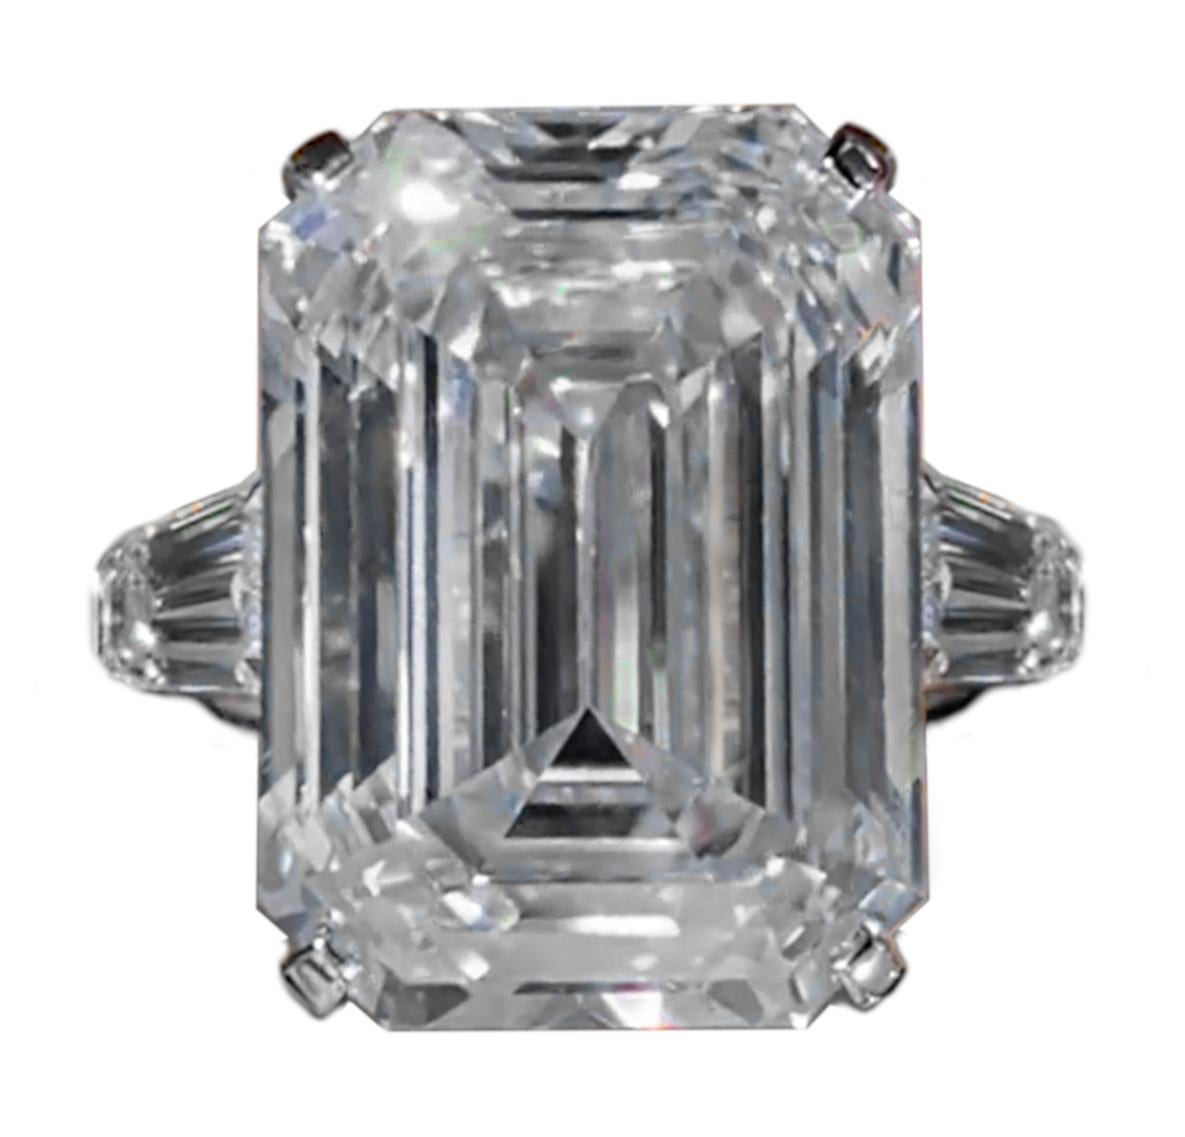 An exceptional ring with a 6.55 carat emerald cut diamond.
The main diamond, really large, is GIA certified, graded h  in color and vvs1 in clarity.
Polish and symmetry are both excellent and has none fluorescence.